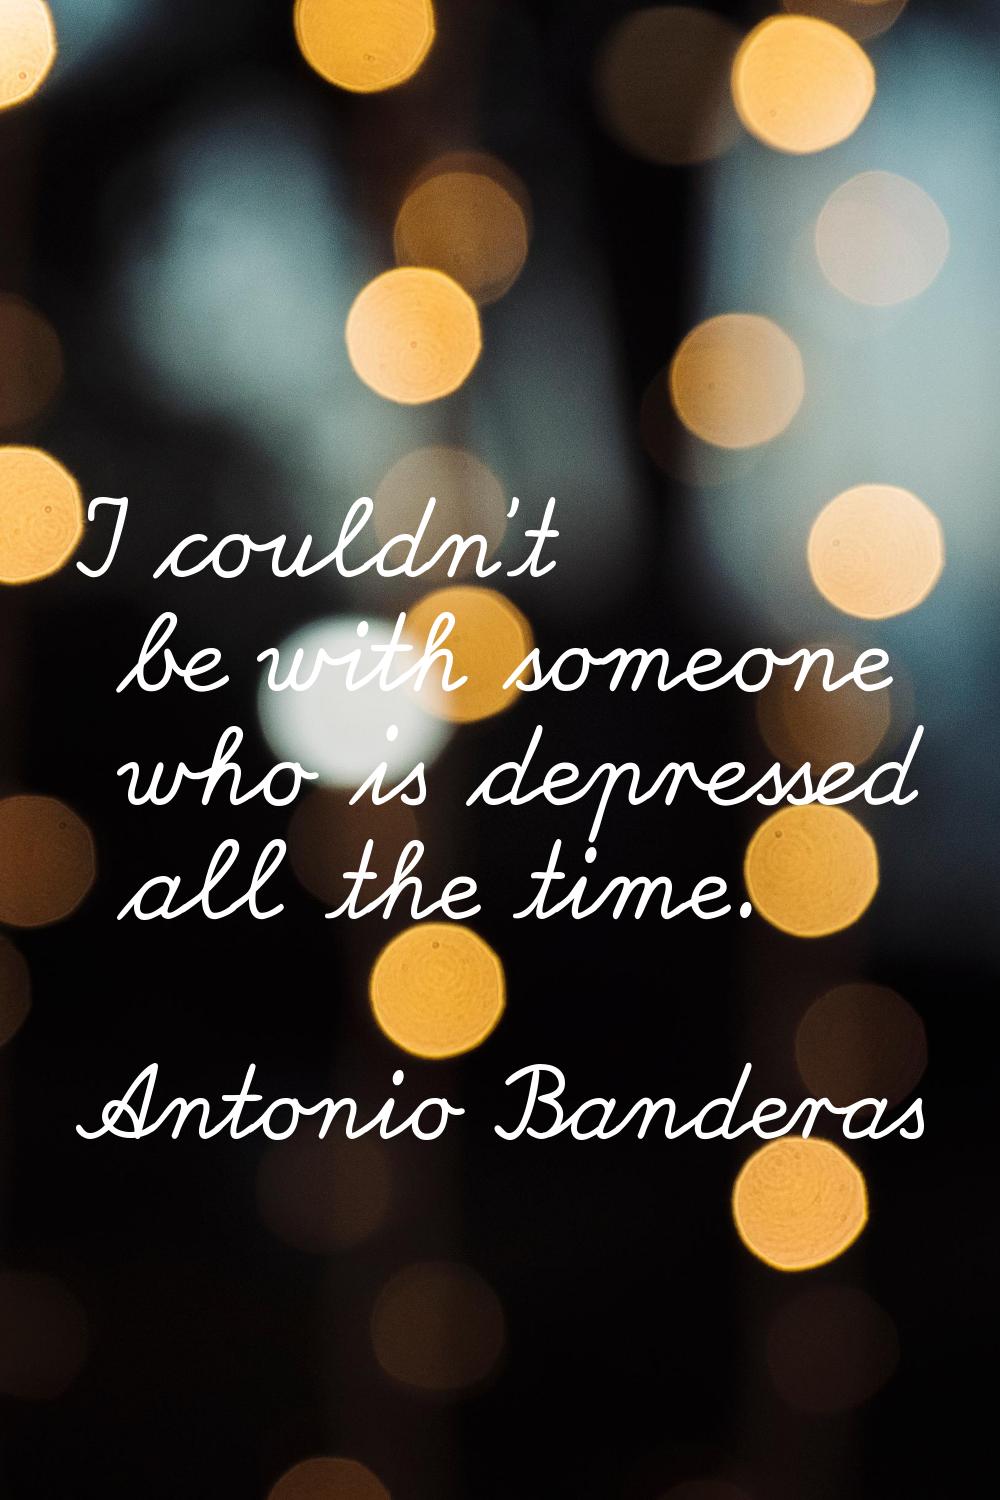 I couldn't be with someone who is depressed all the time.